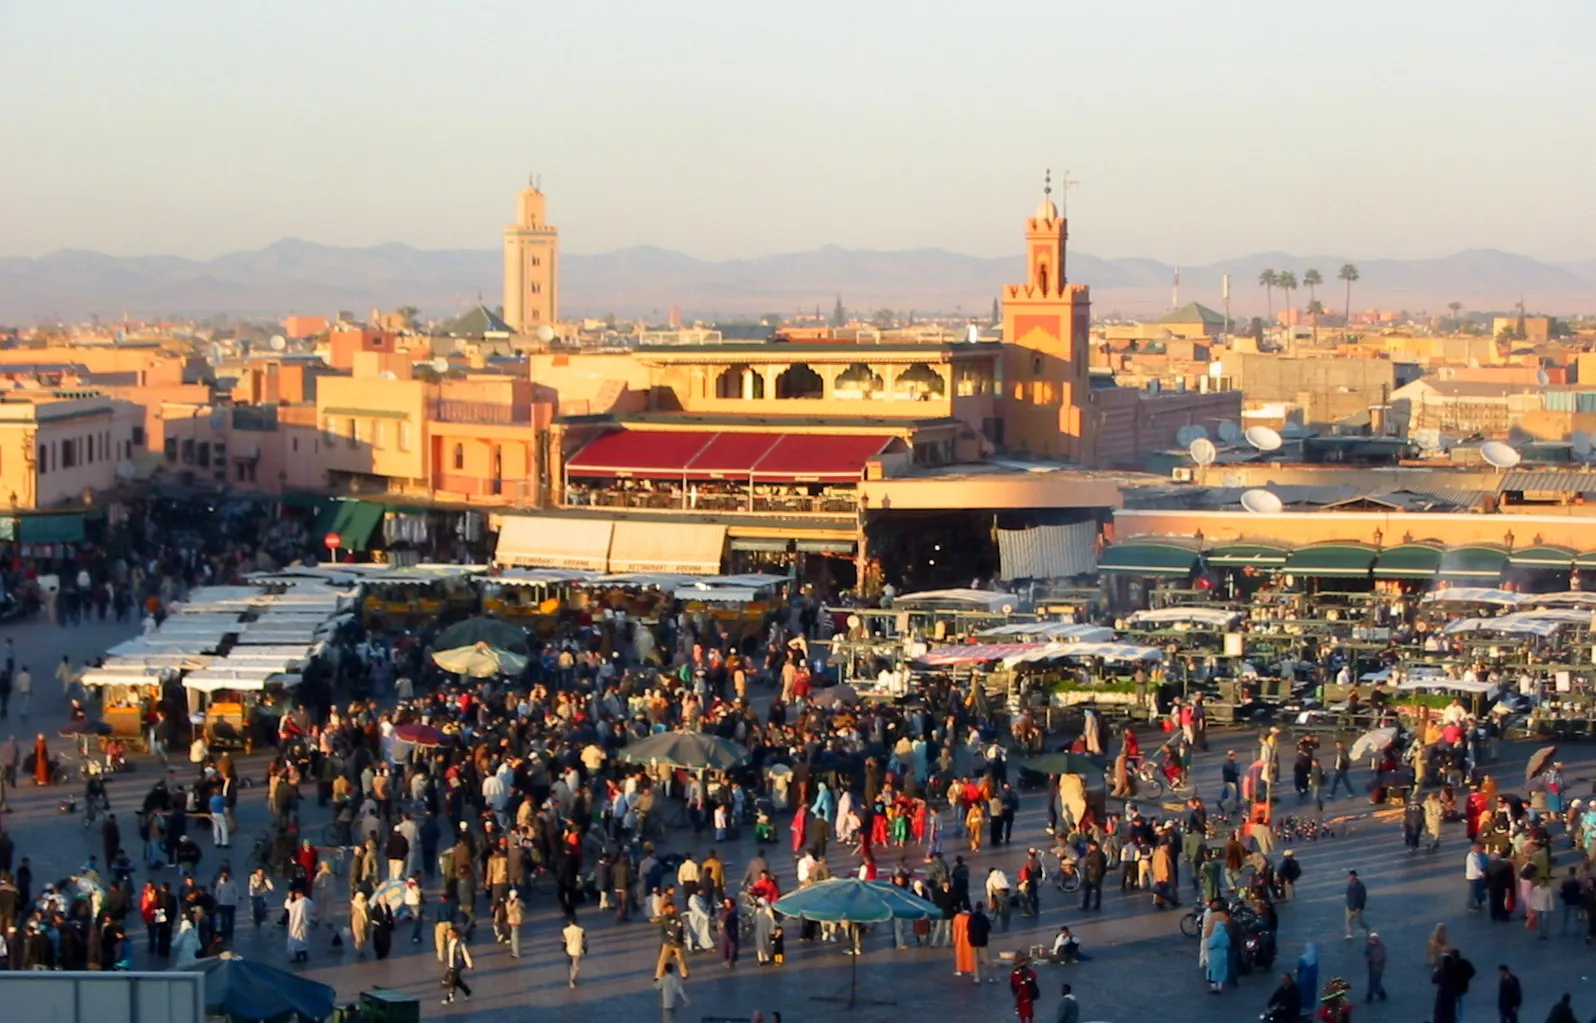 Djemaa el-Fna Square in Morocco, Africa | Architecture - Rated 3.7